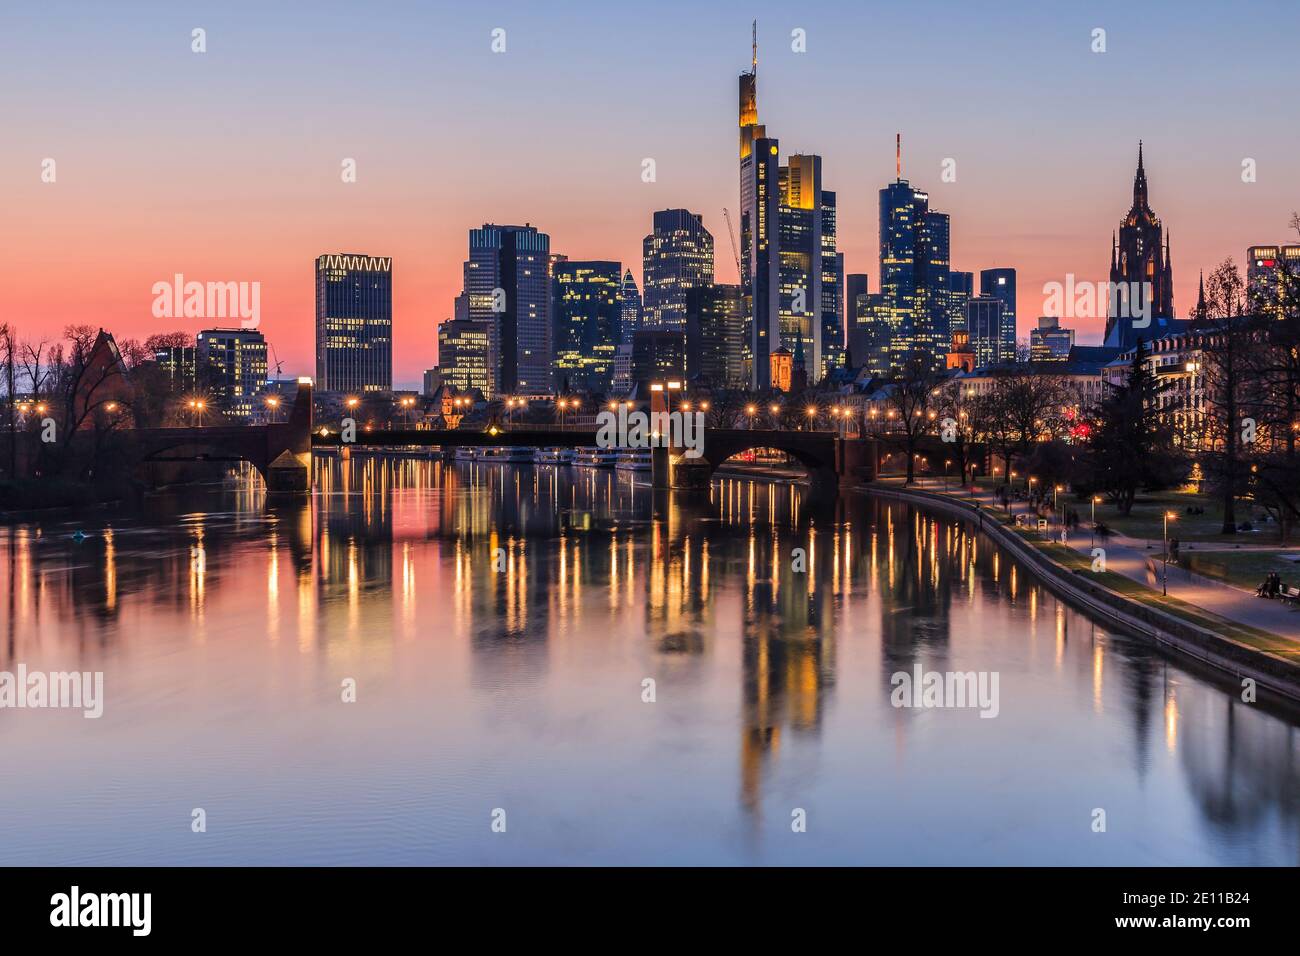 Frankfurt skyline in the evening at sunset. High-rise buildings from the financial district and river Main with reflections. Illuminated houses Stock Photo